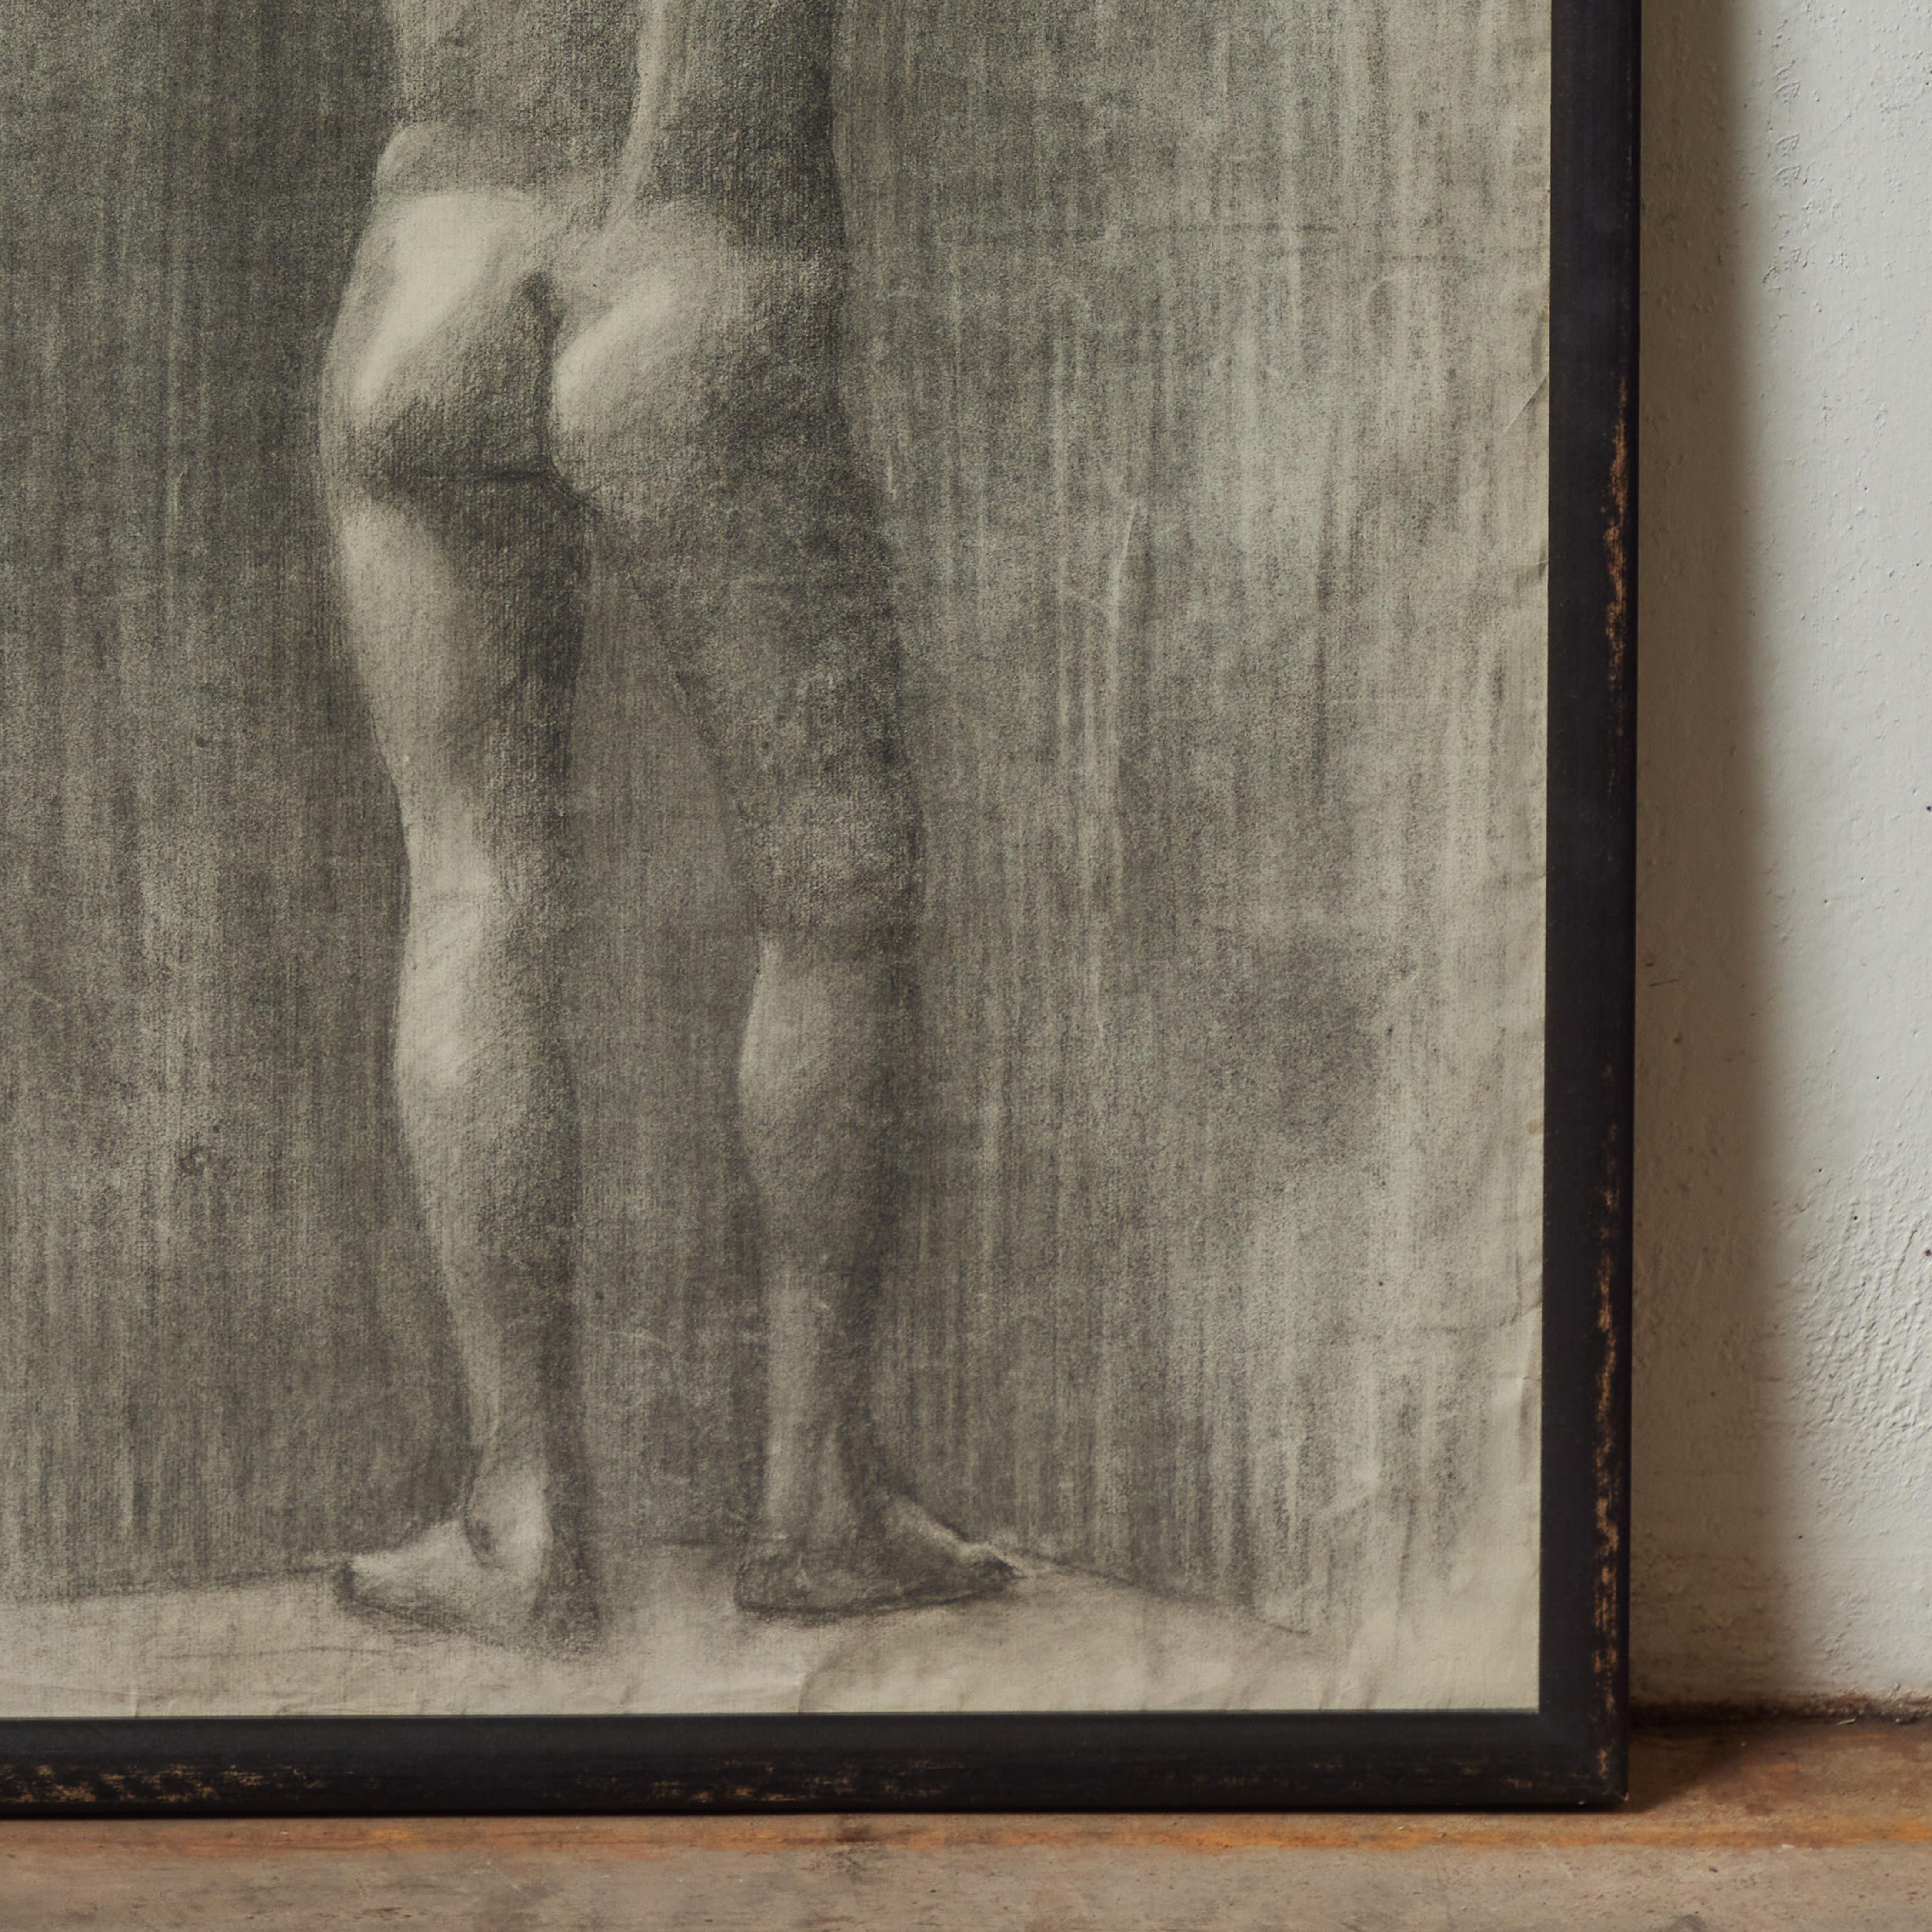 Turn of the century French academic charcoal drawing of standing nude figure, as seen from behind. As if to mirror the viewer or artist's own stance, the figure appears lost in an interior world of contemplation and reverie.

France, circa